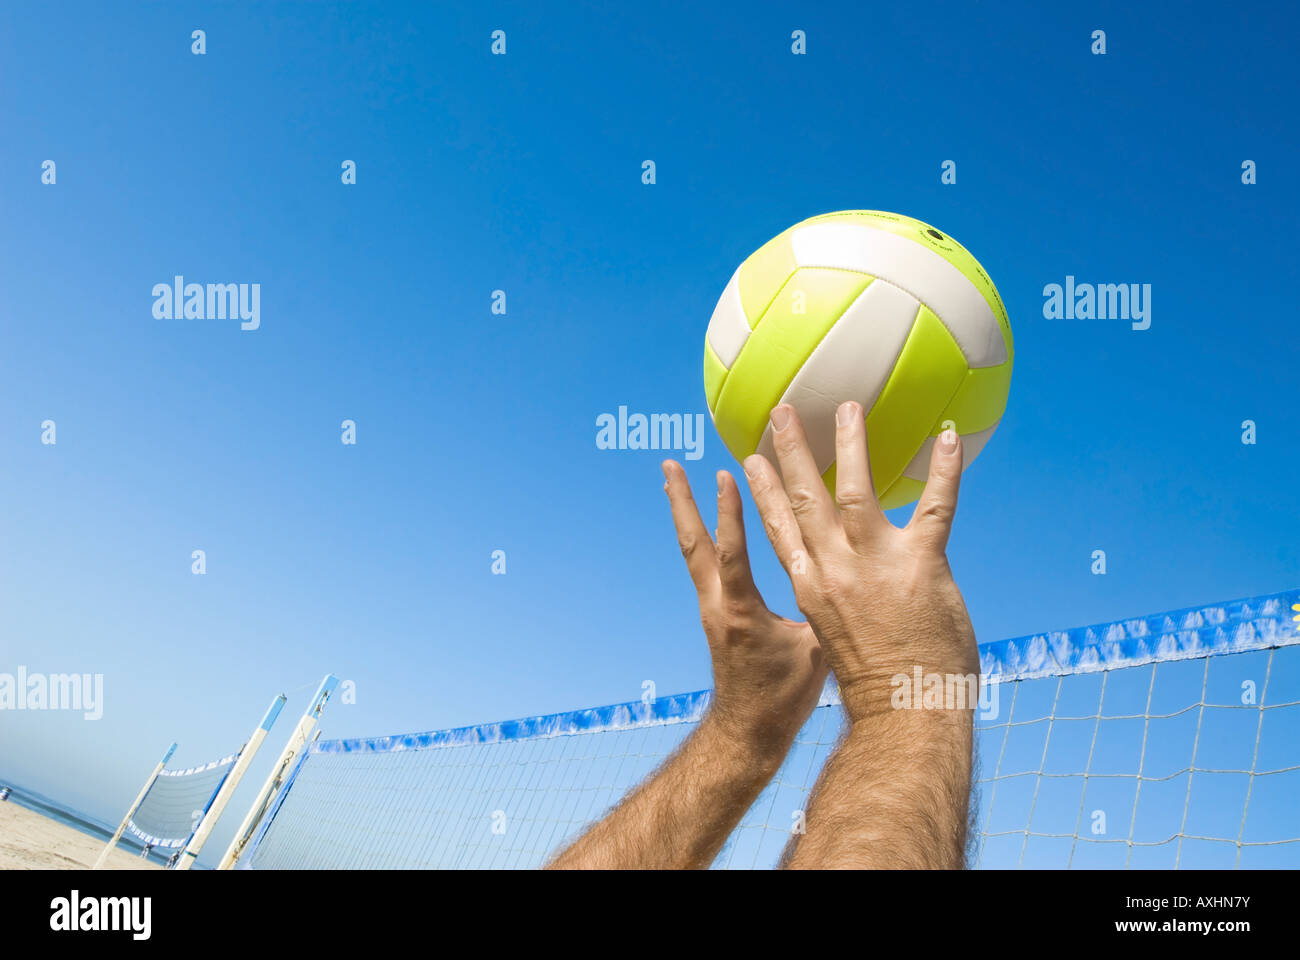 A volleyball player lobs a ball during a game at the beach Stock Photo